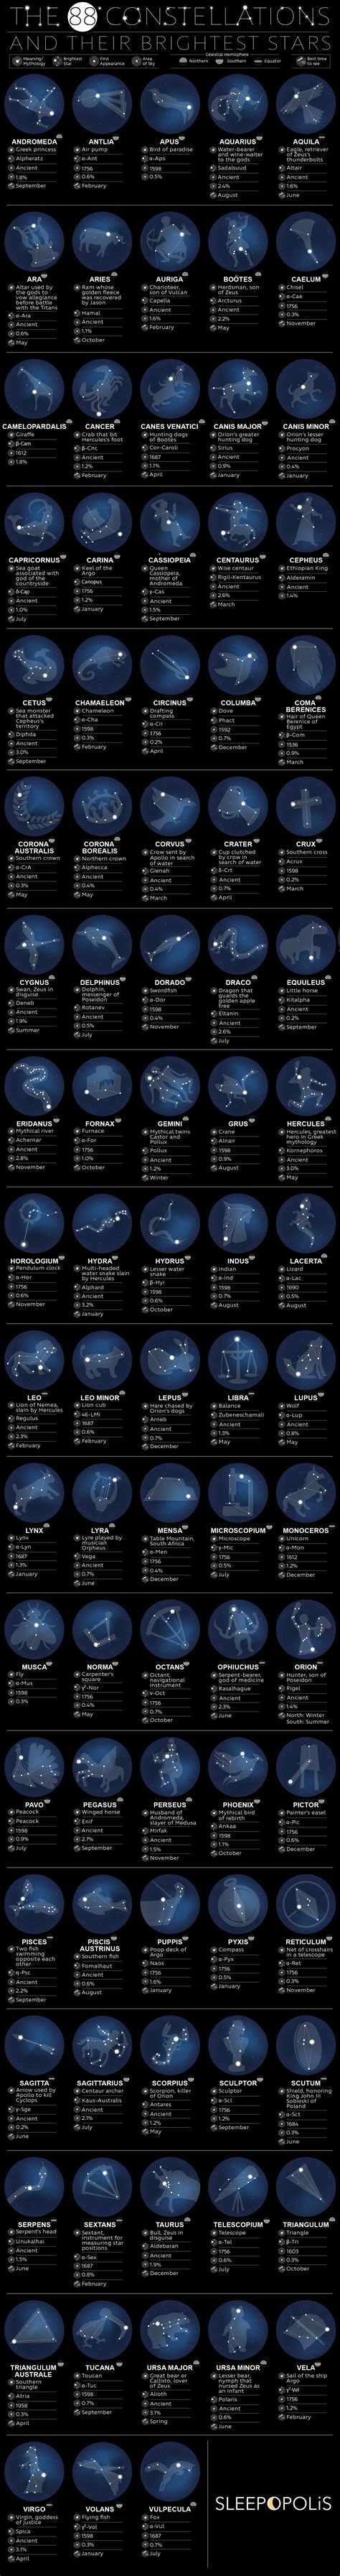 The 88 Constellations And Their Brightest Stars Infographics